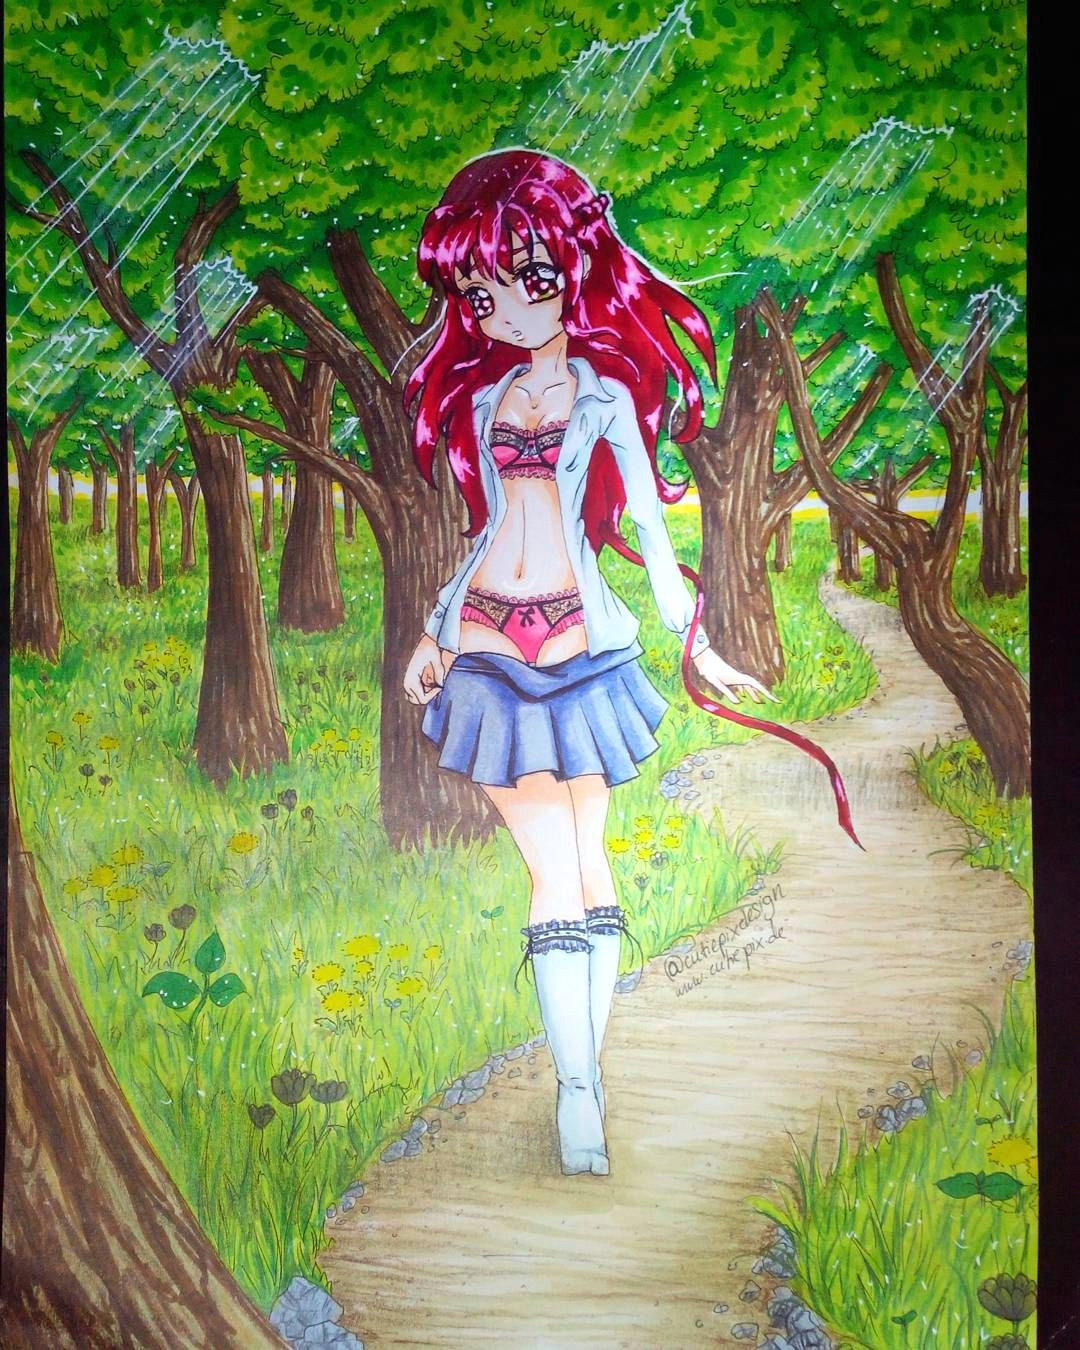 Anime Drawing Nature Finely Done Woah This Was A Hard Way I Never Draw Backgrounds and